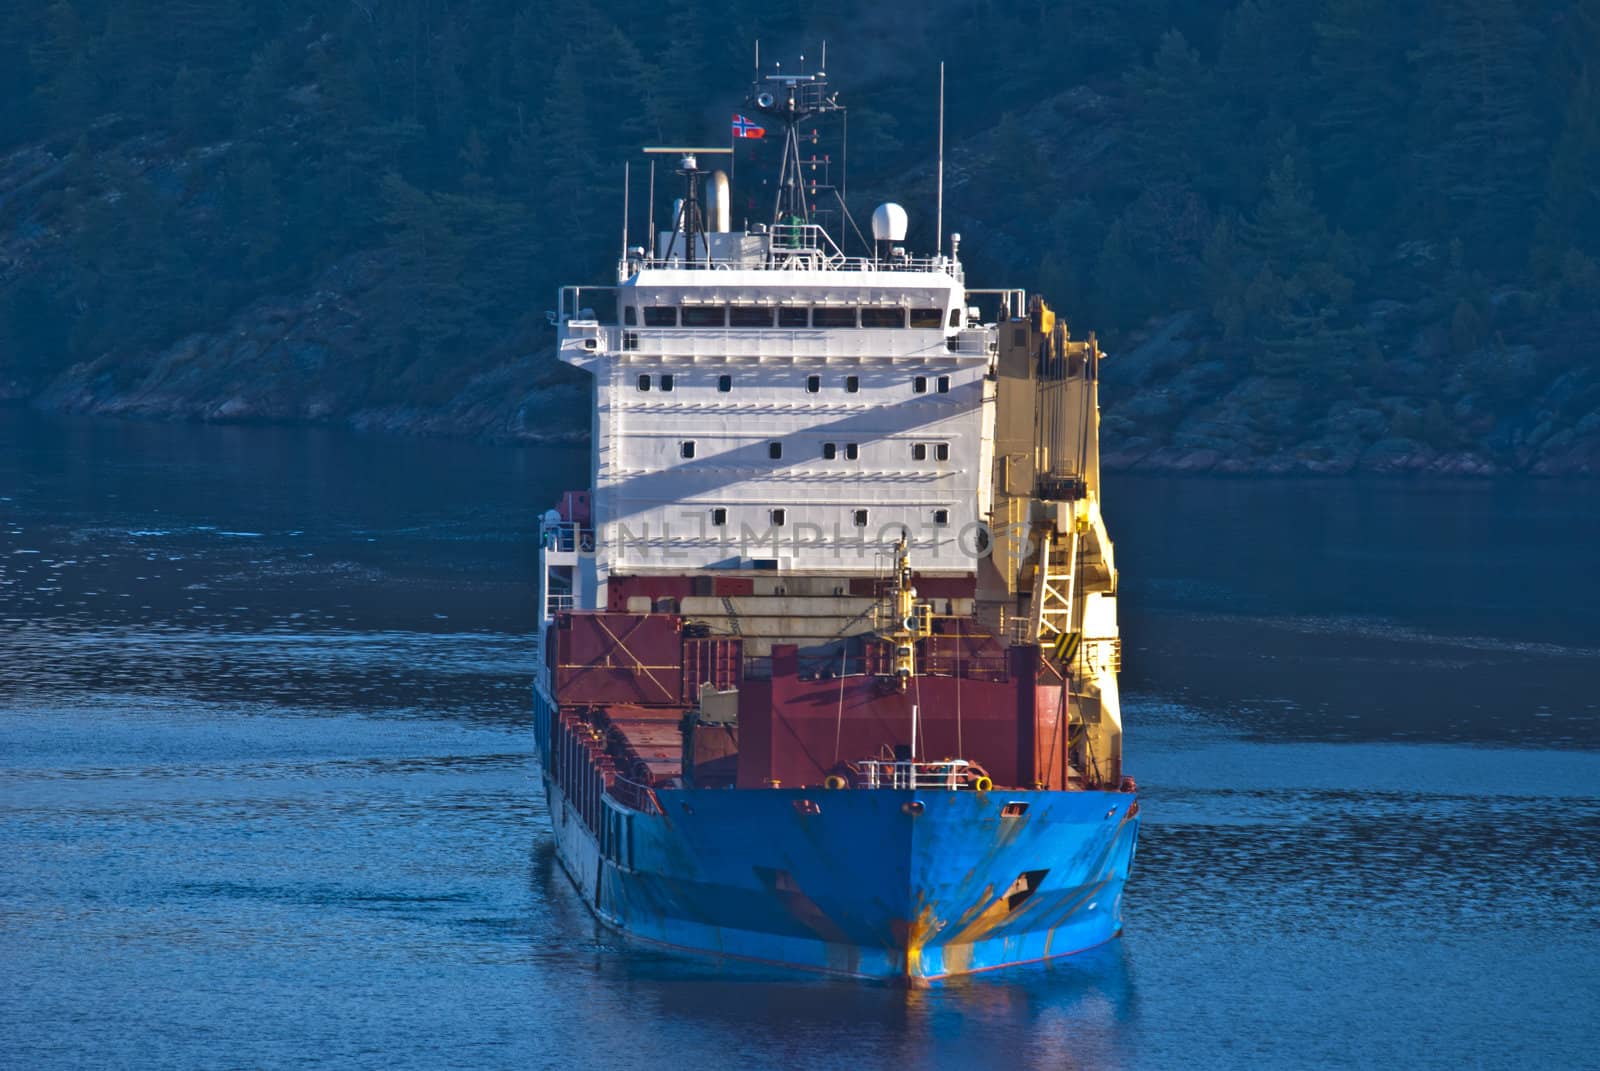 large vessels in ringdalsfjord, image 13 by steirus